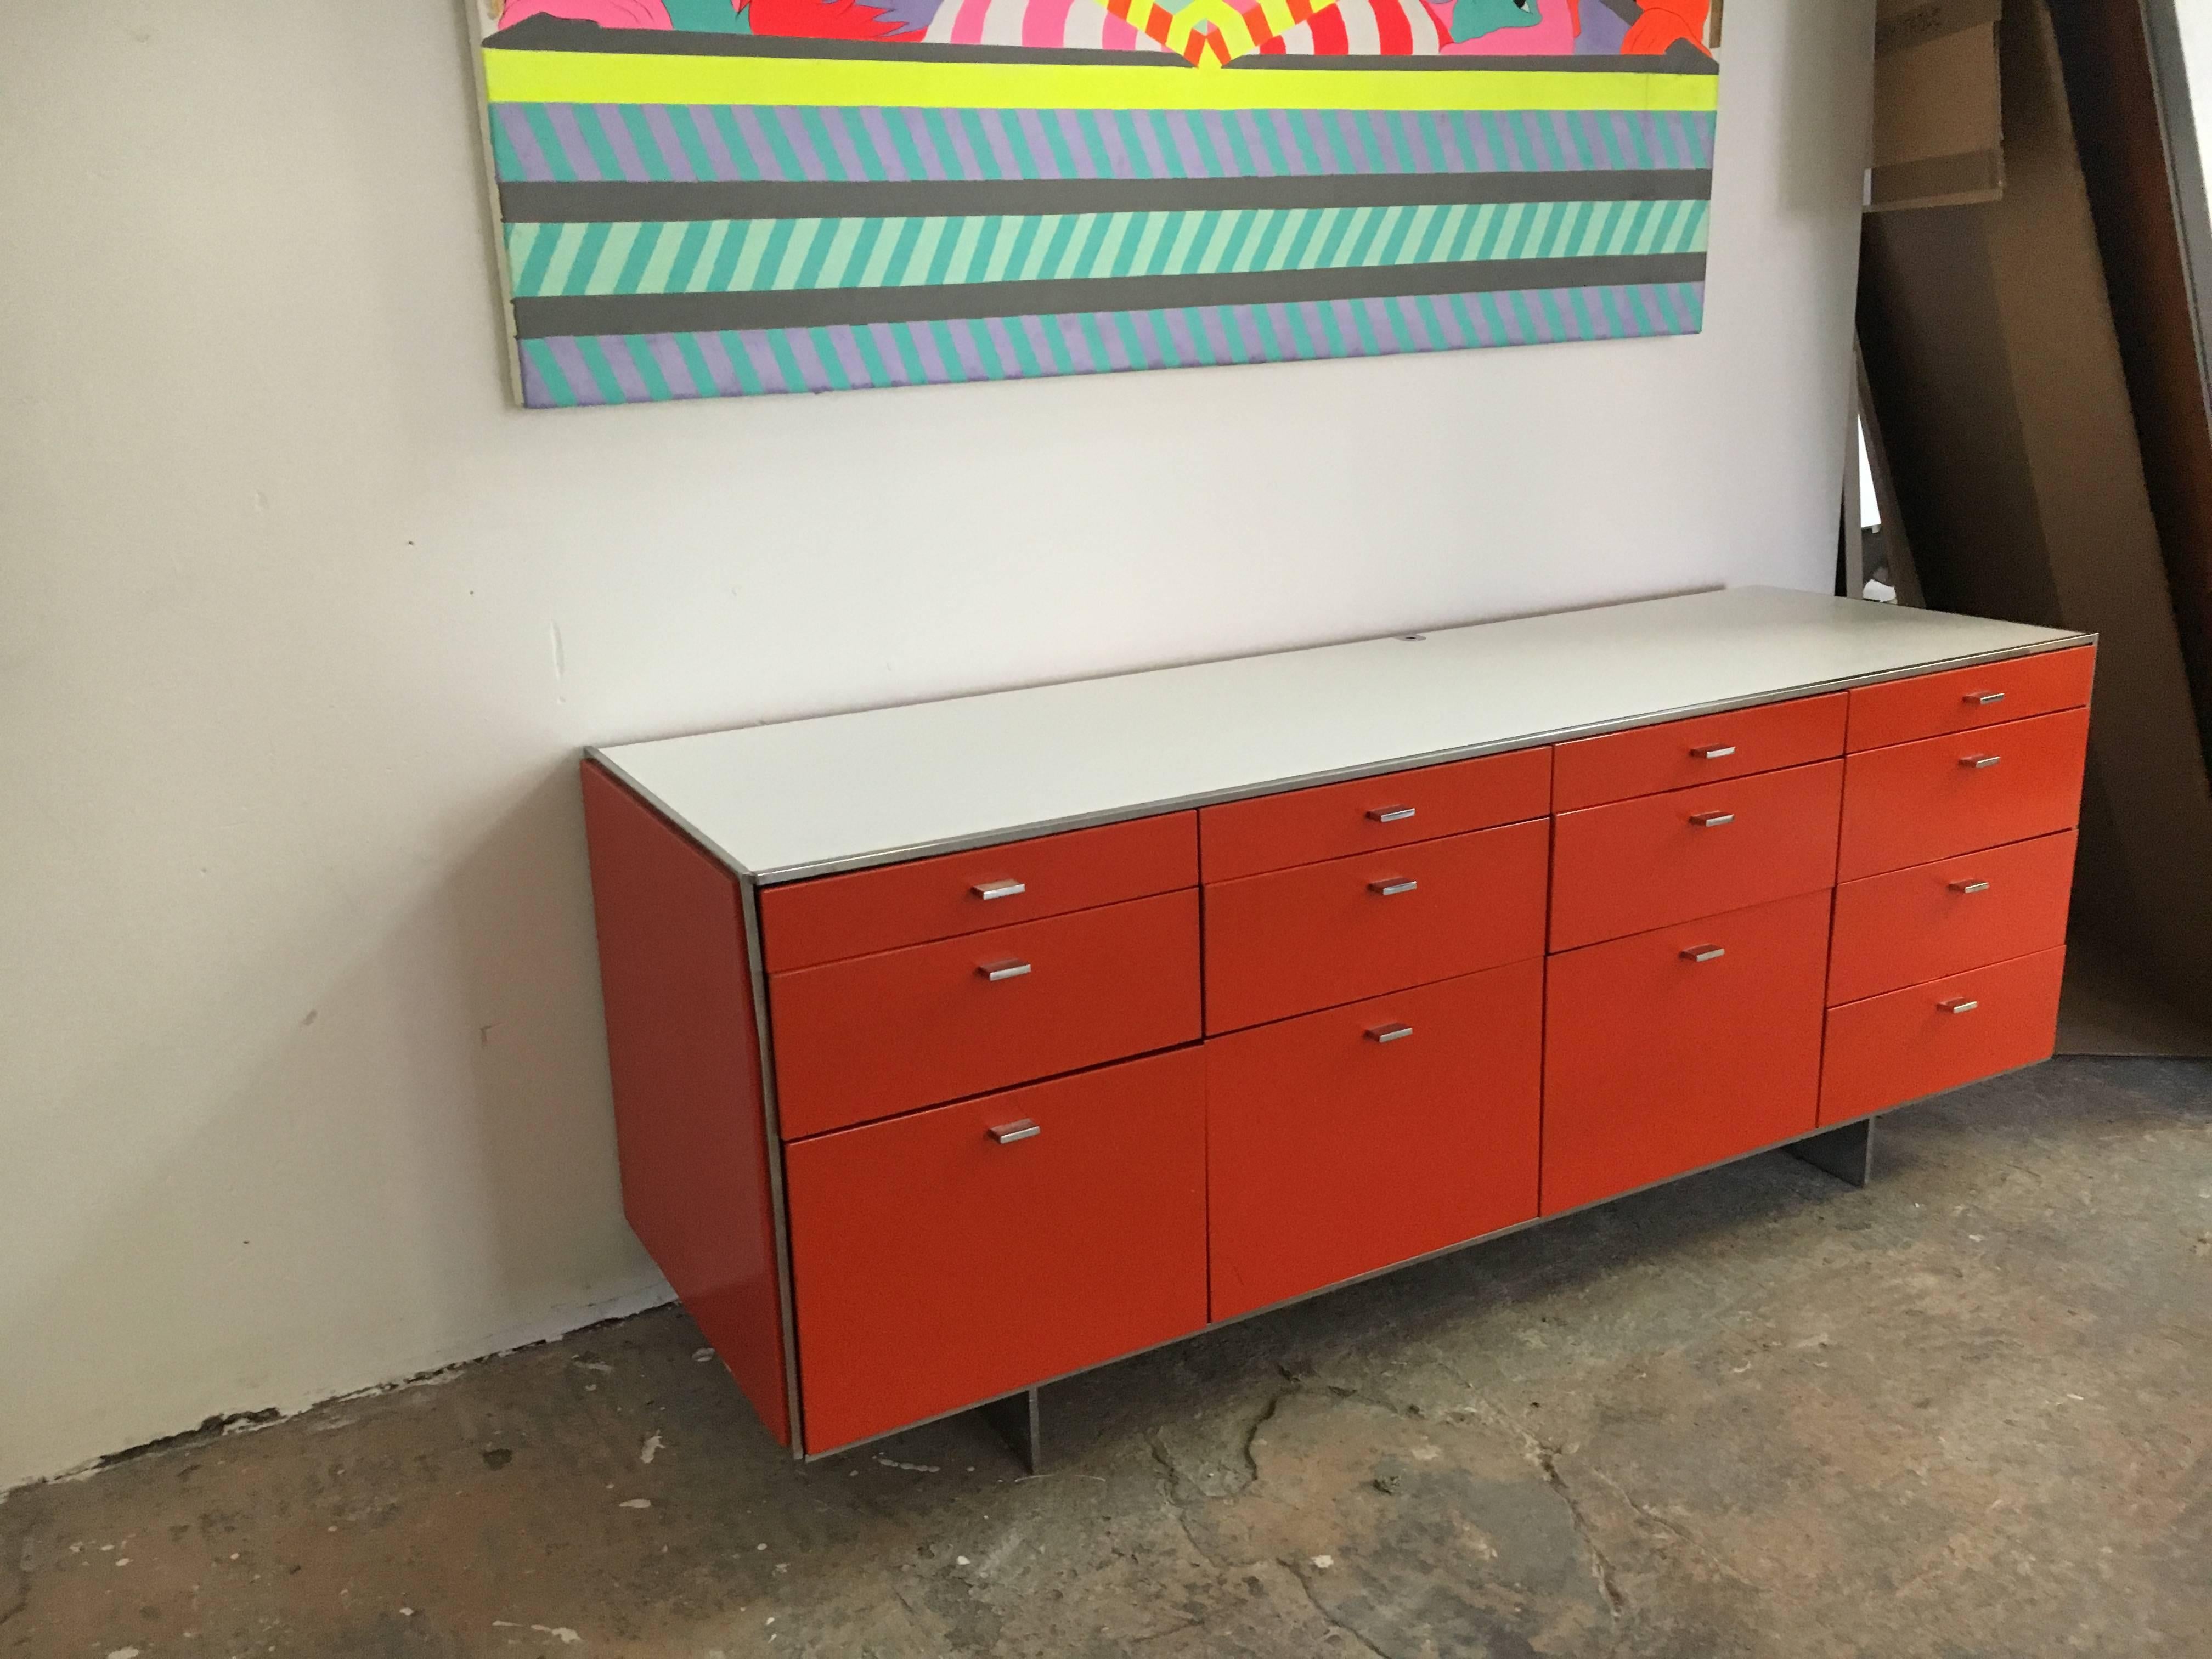 Credenza designed by Davis Allen, made by GF, circa 1968.
Enameled steel with chrome base and pulls, white laminate top,
lock on the right side.